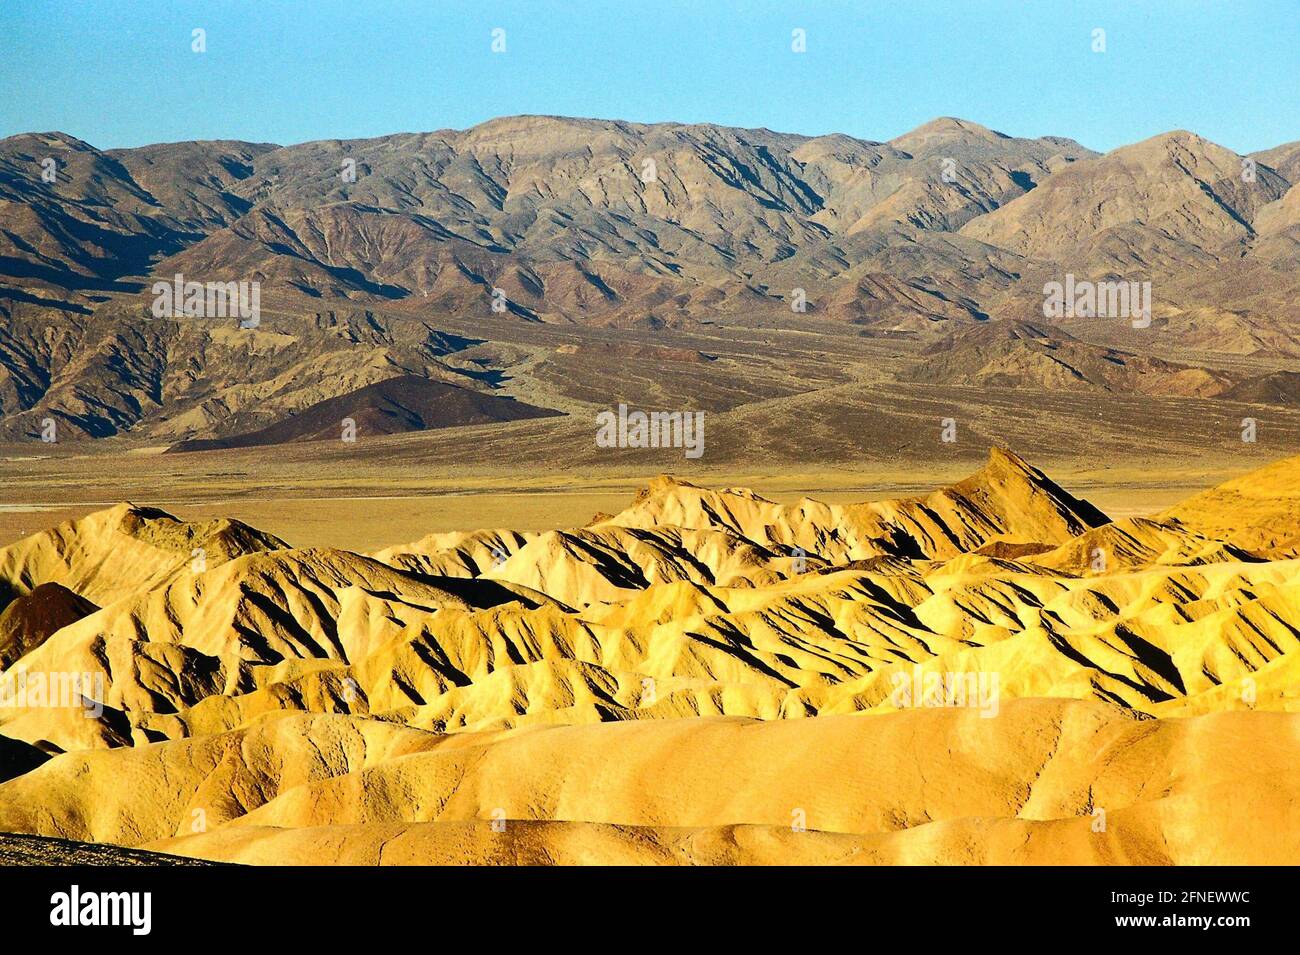 'Zabriskie Point' in Death Valley, California. [automated translation] Stock Photo